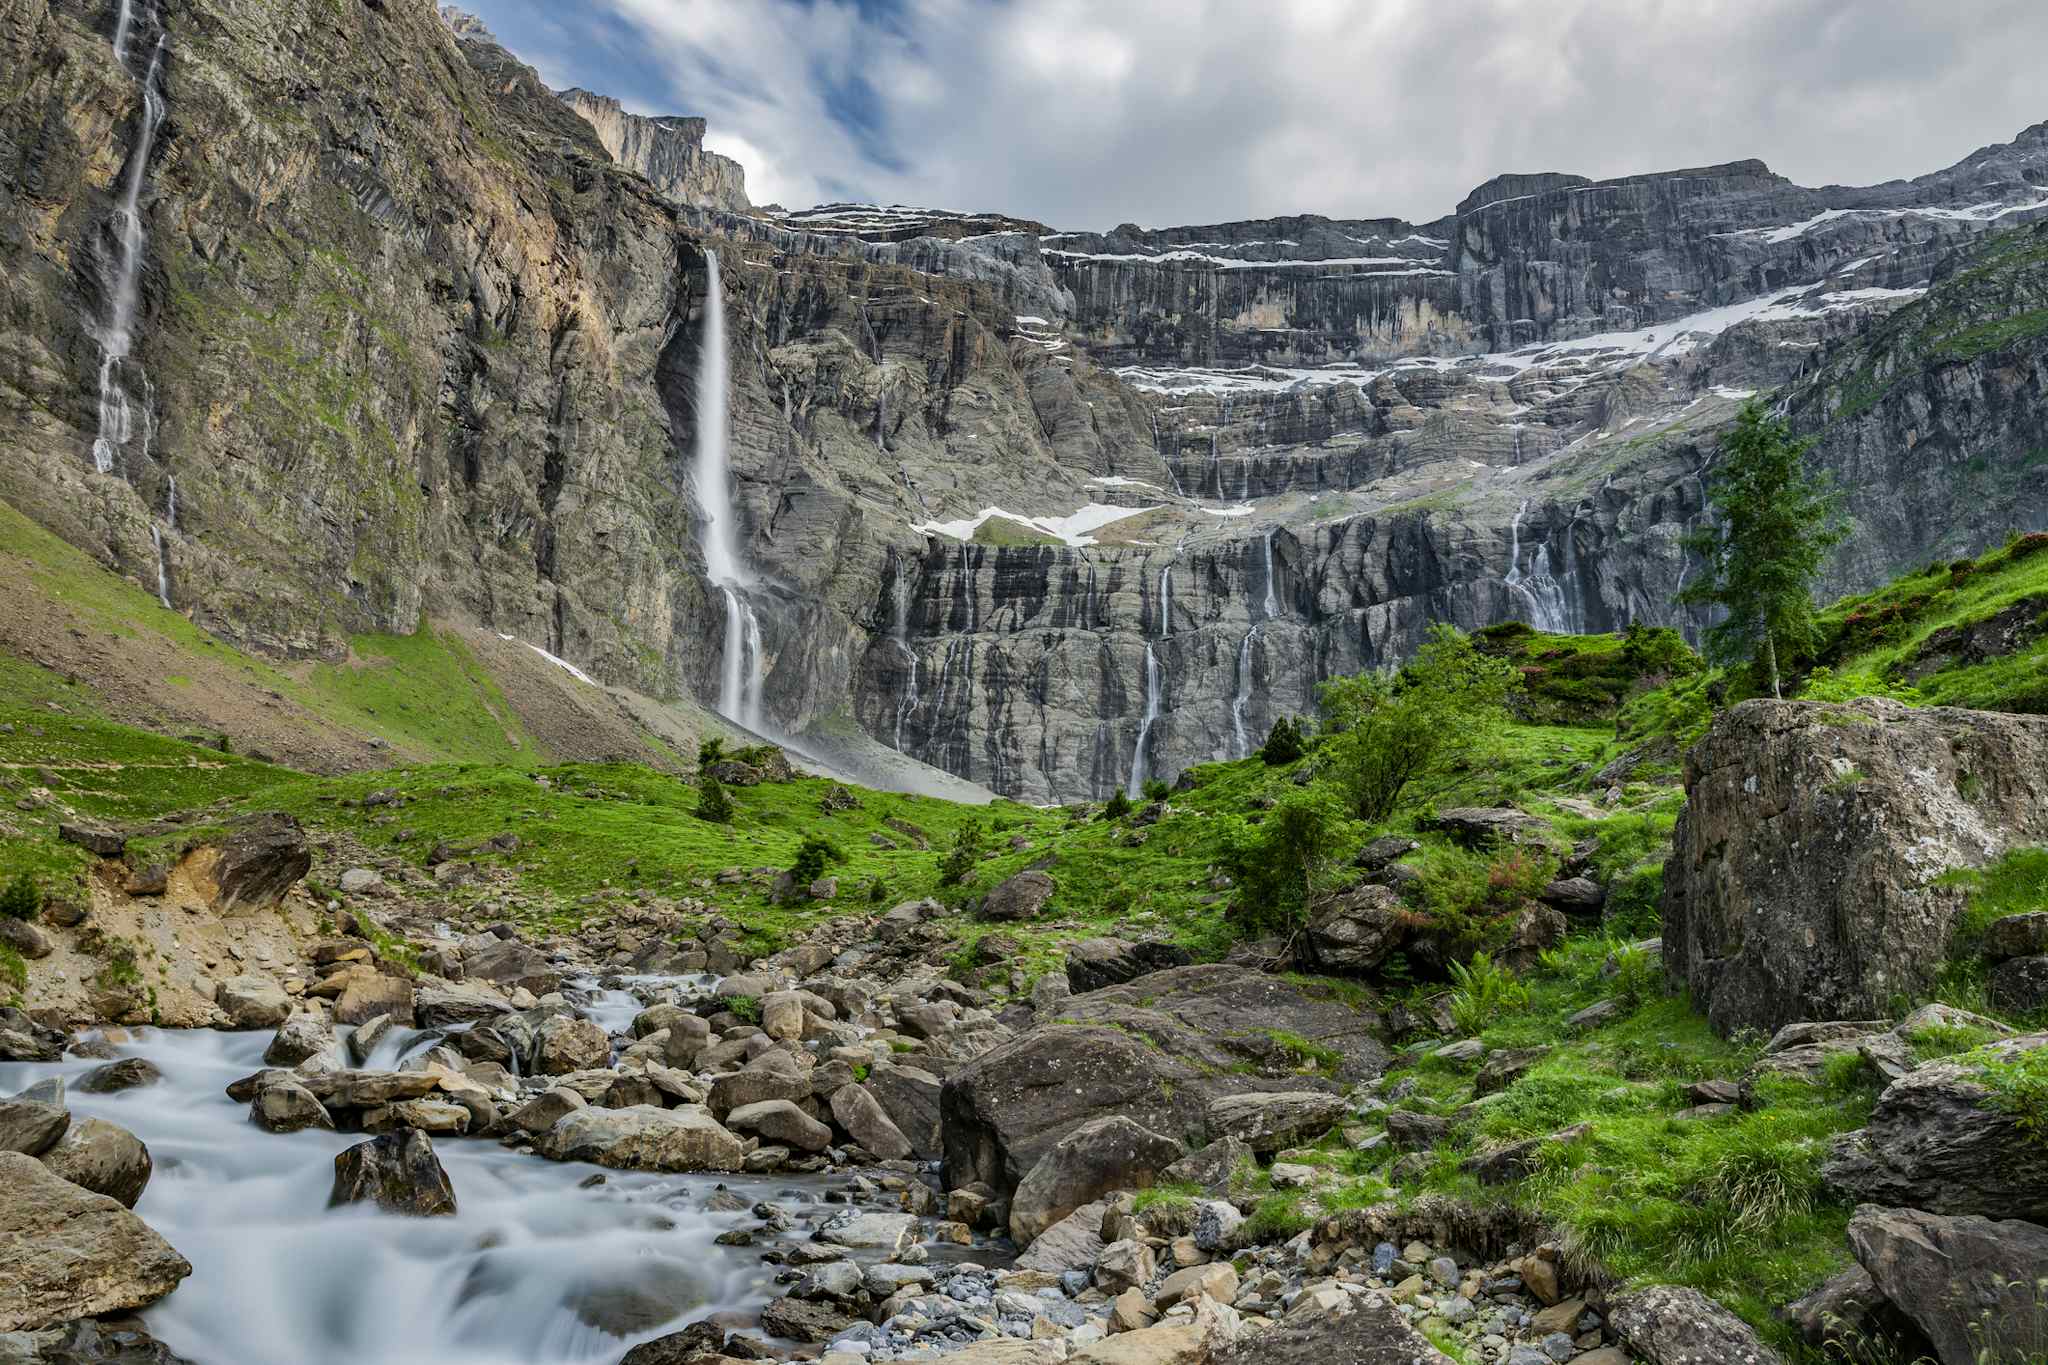 Cirque de Gavarnie in the French Pyrenees. Photo: GettyImages-1167004795